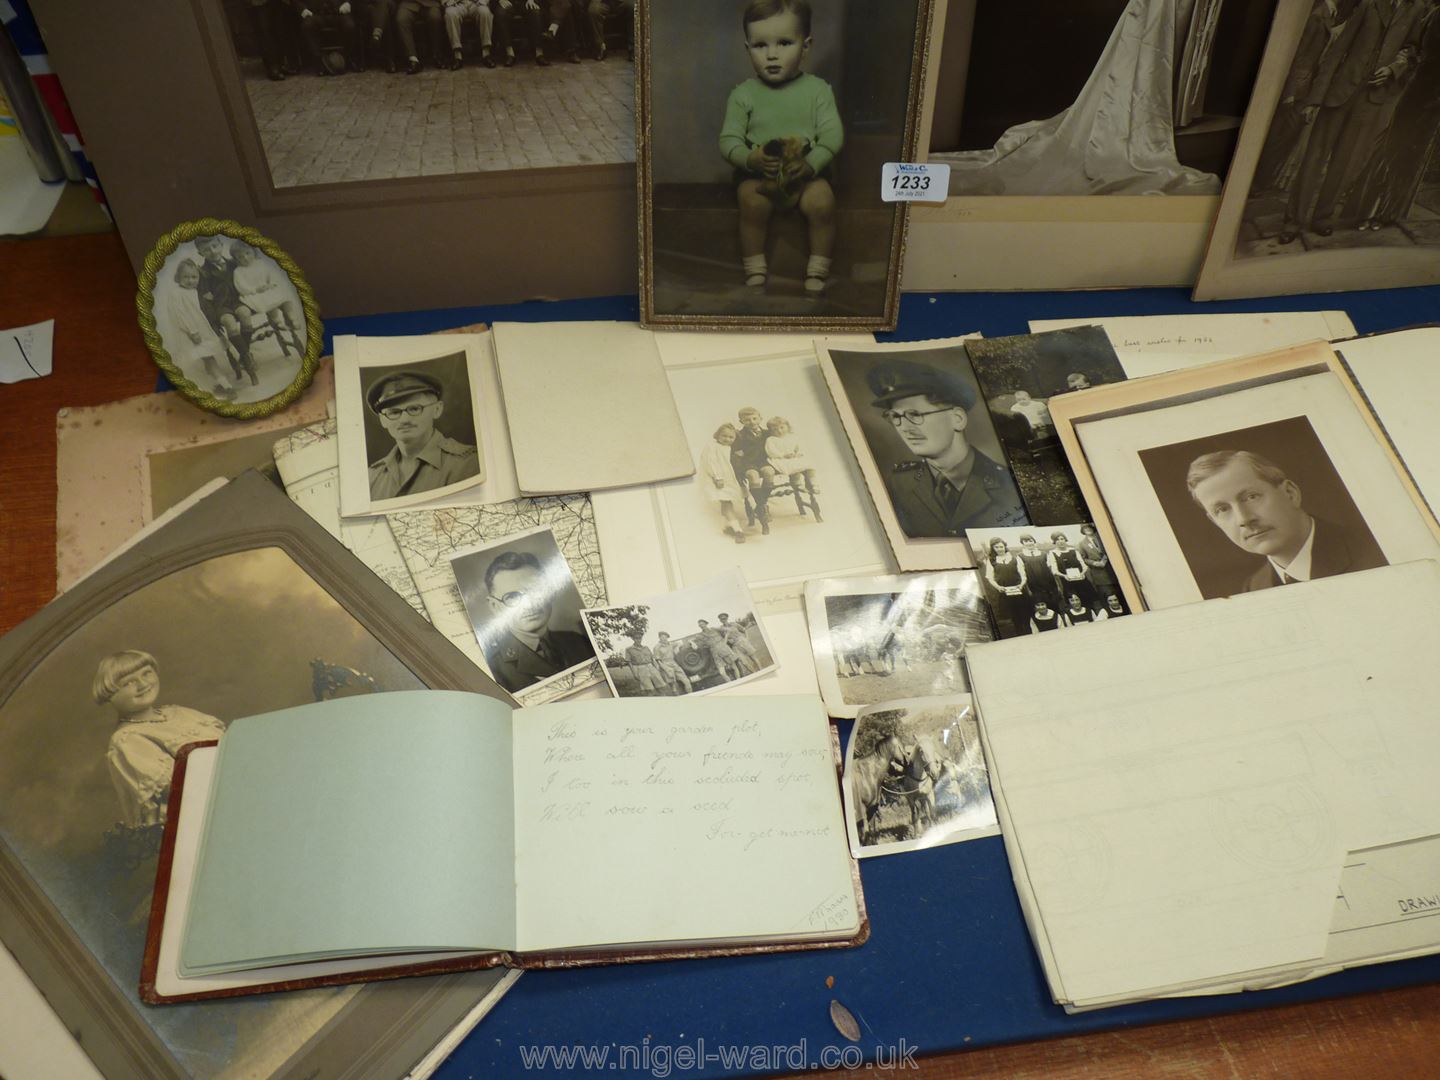 A quantity of black and white photographs and an autograph book. - Image 2 of 3